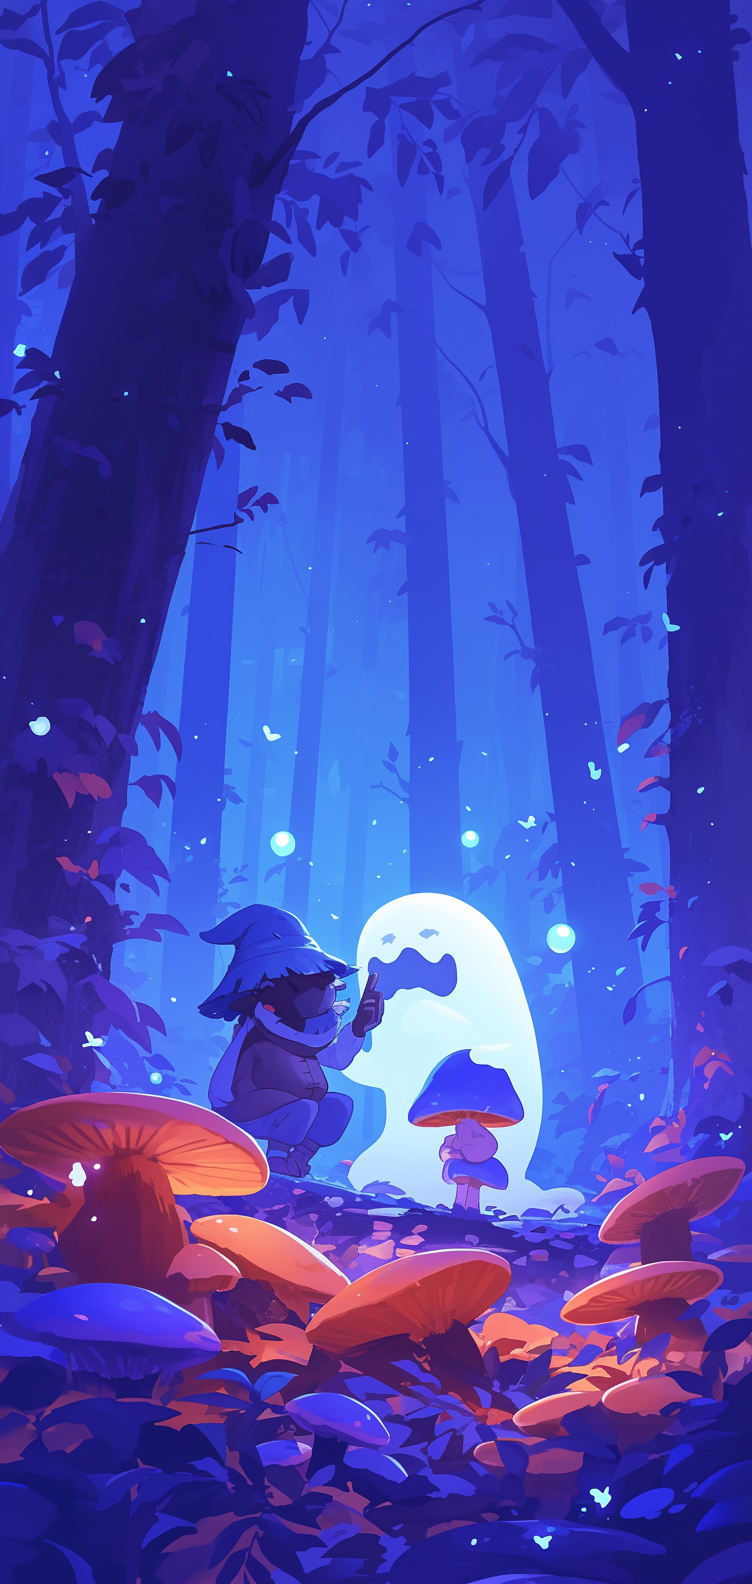 Enchanted Forest Night